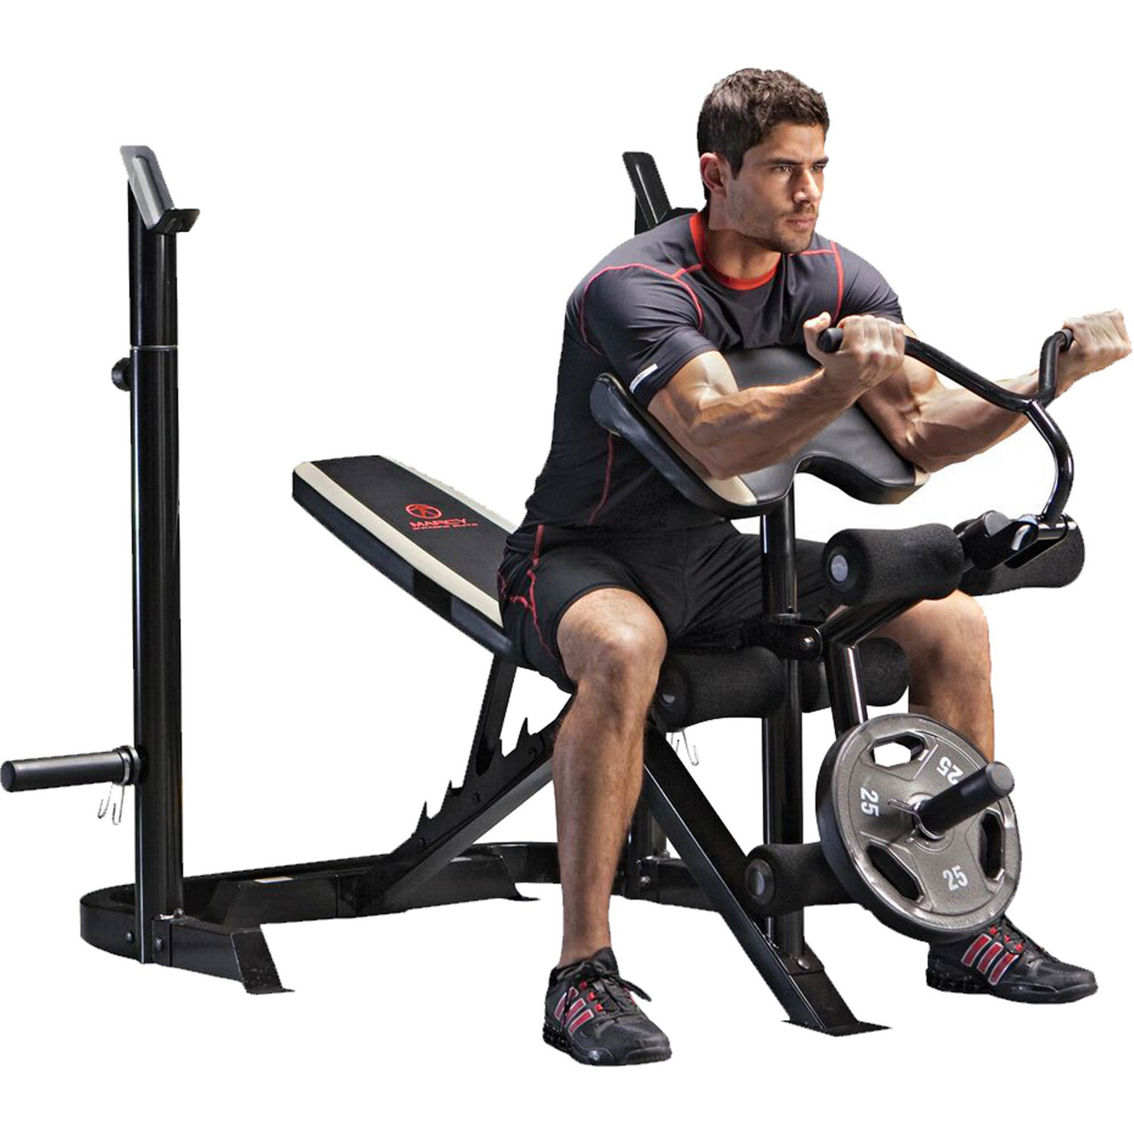 Marcy 2 pc. Mid Width Strength Bench MD 879 - Image 2 of 2